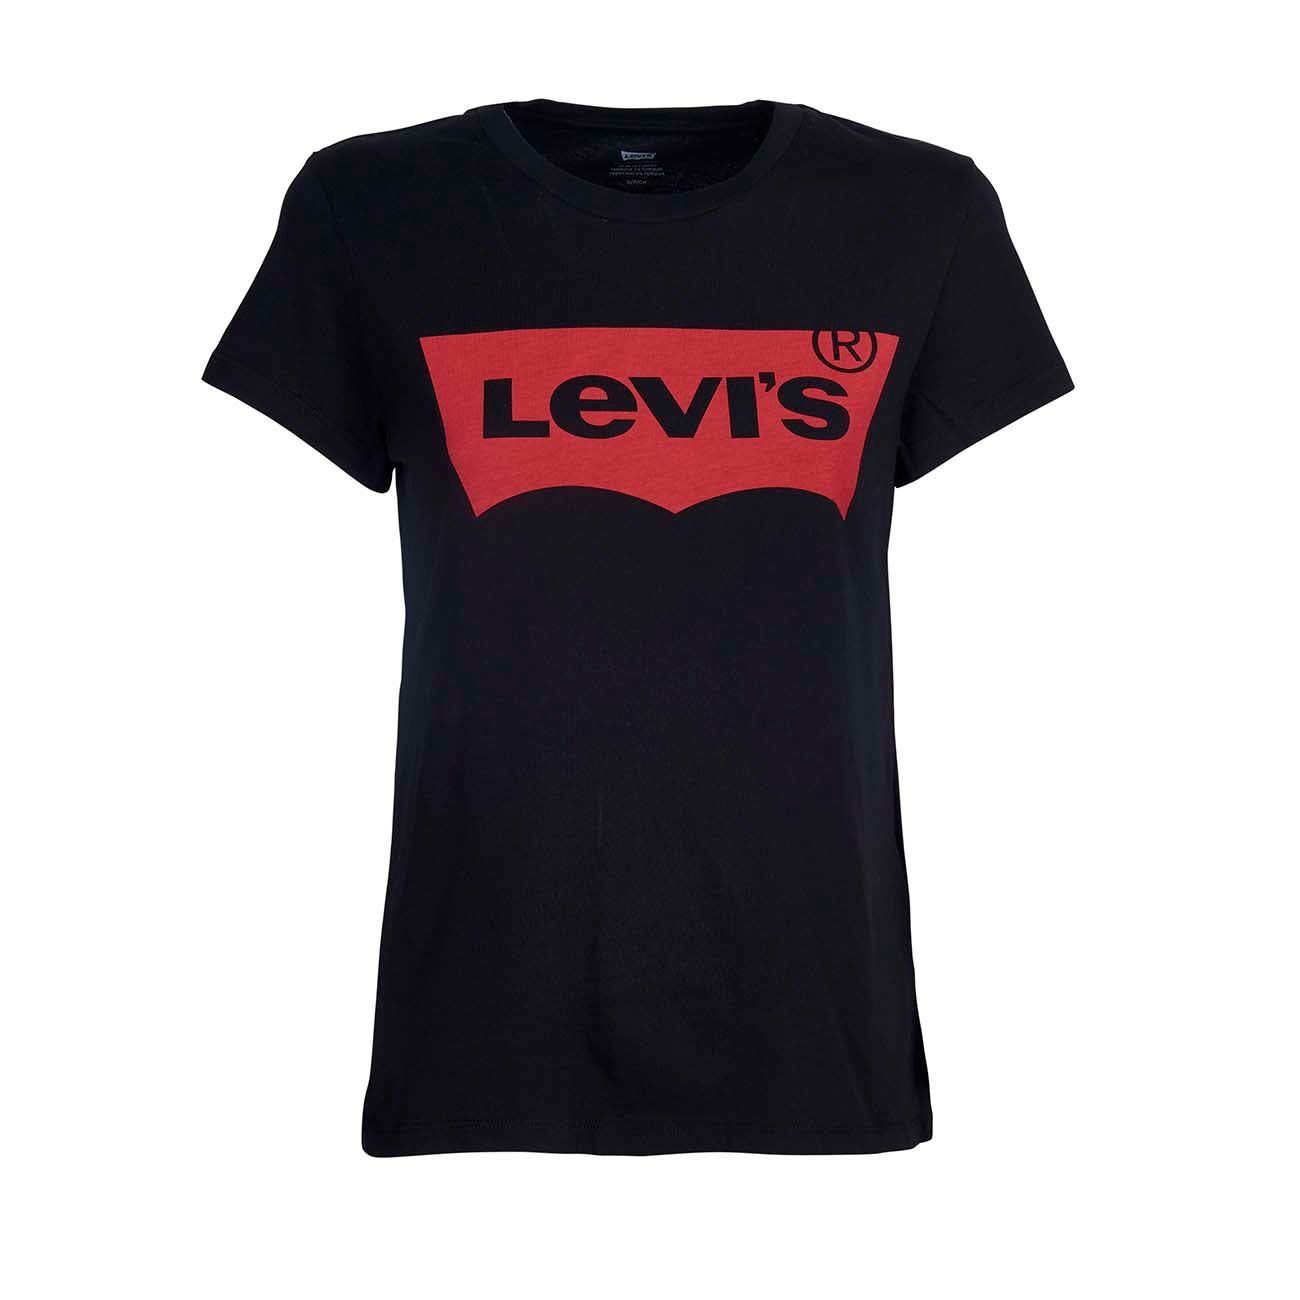 Top 81+ imagen levi’s black t shirt with red logo